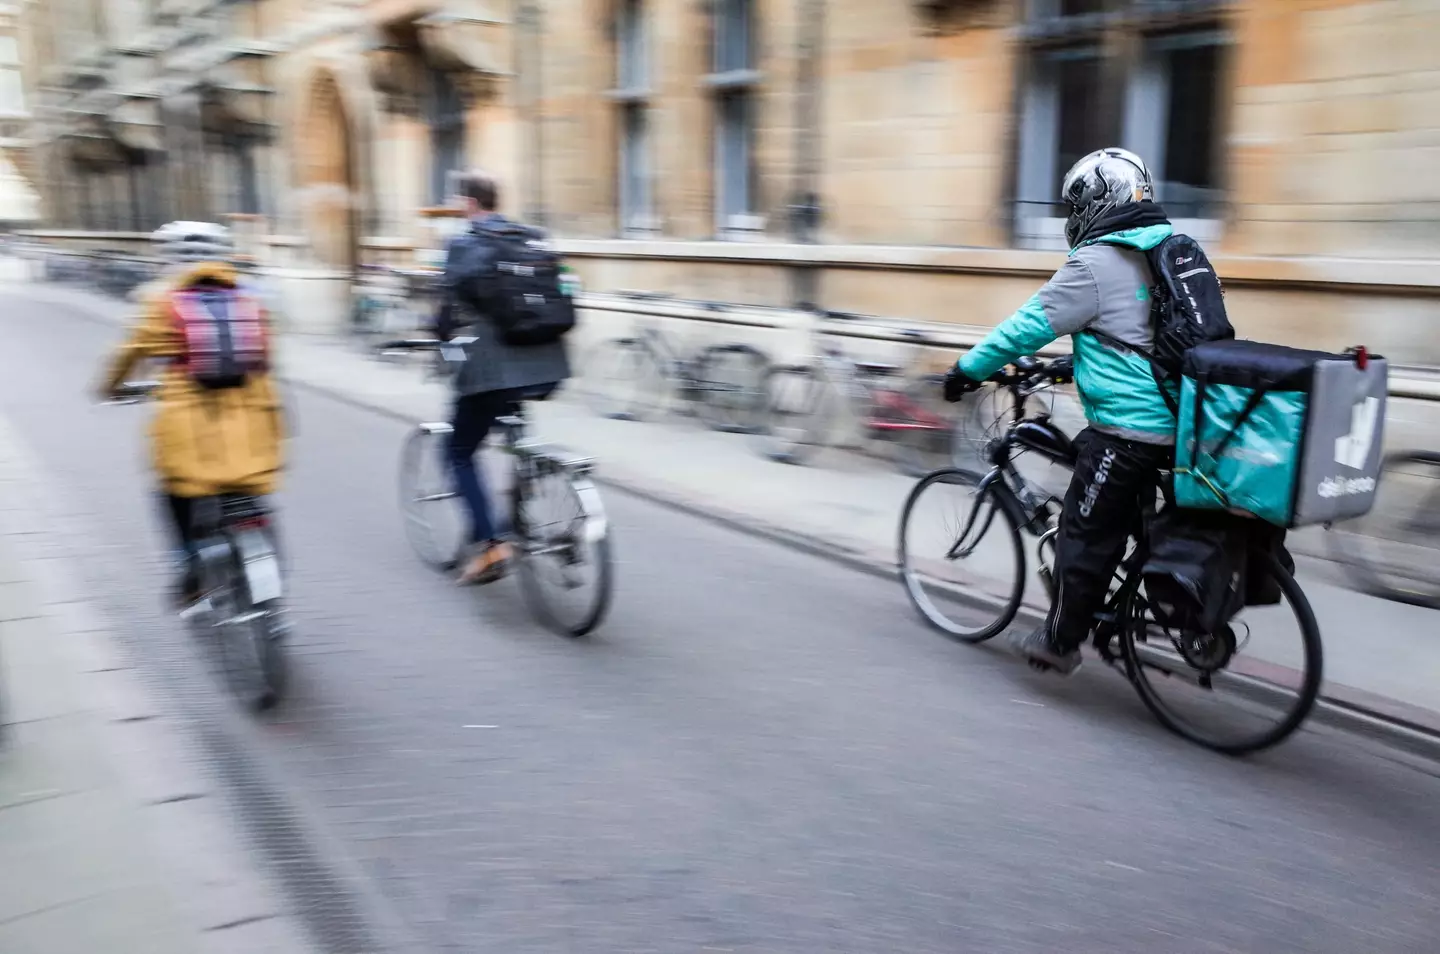 Deliveroo is offering customers the option to buy now and pay later, but there's been some backlash.